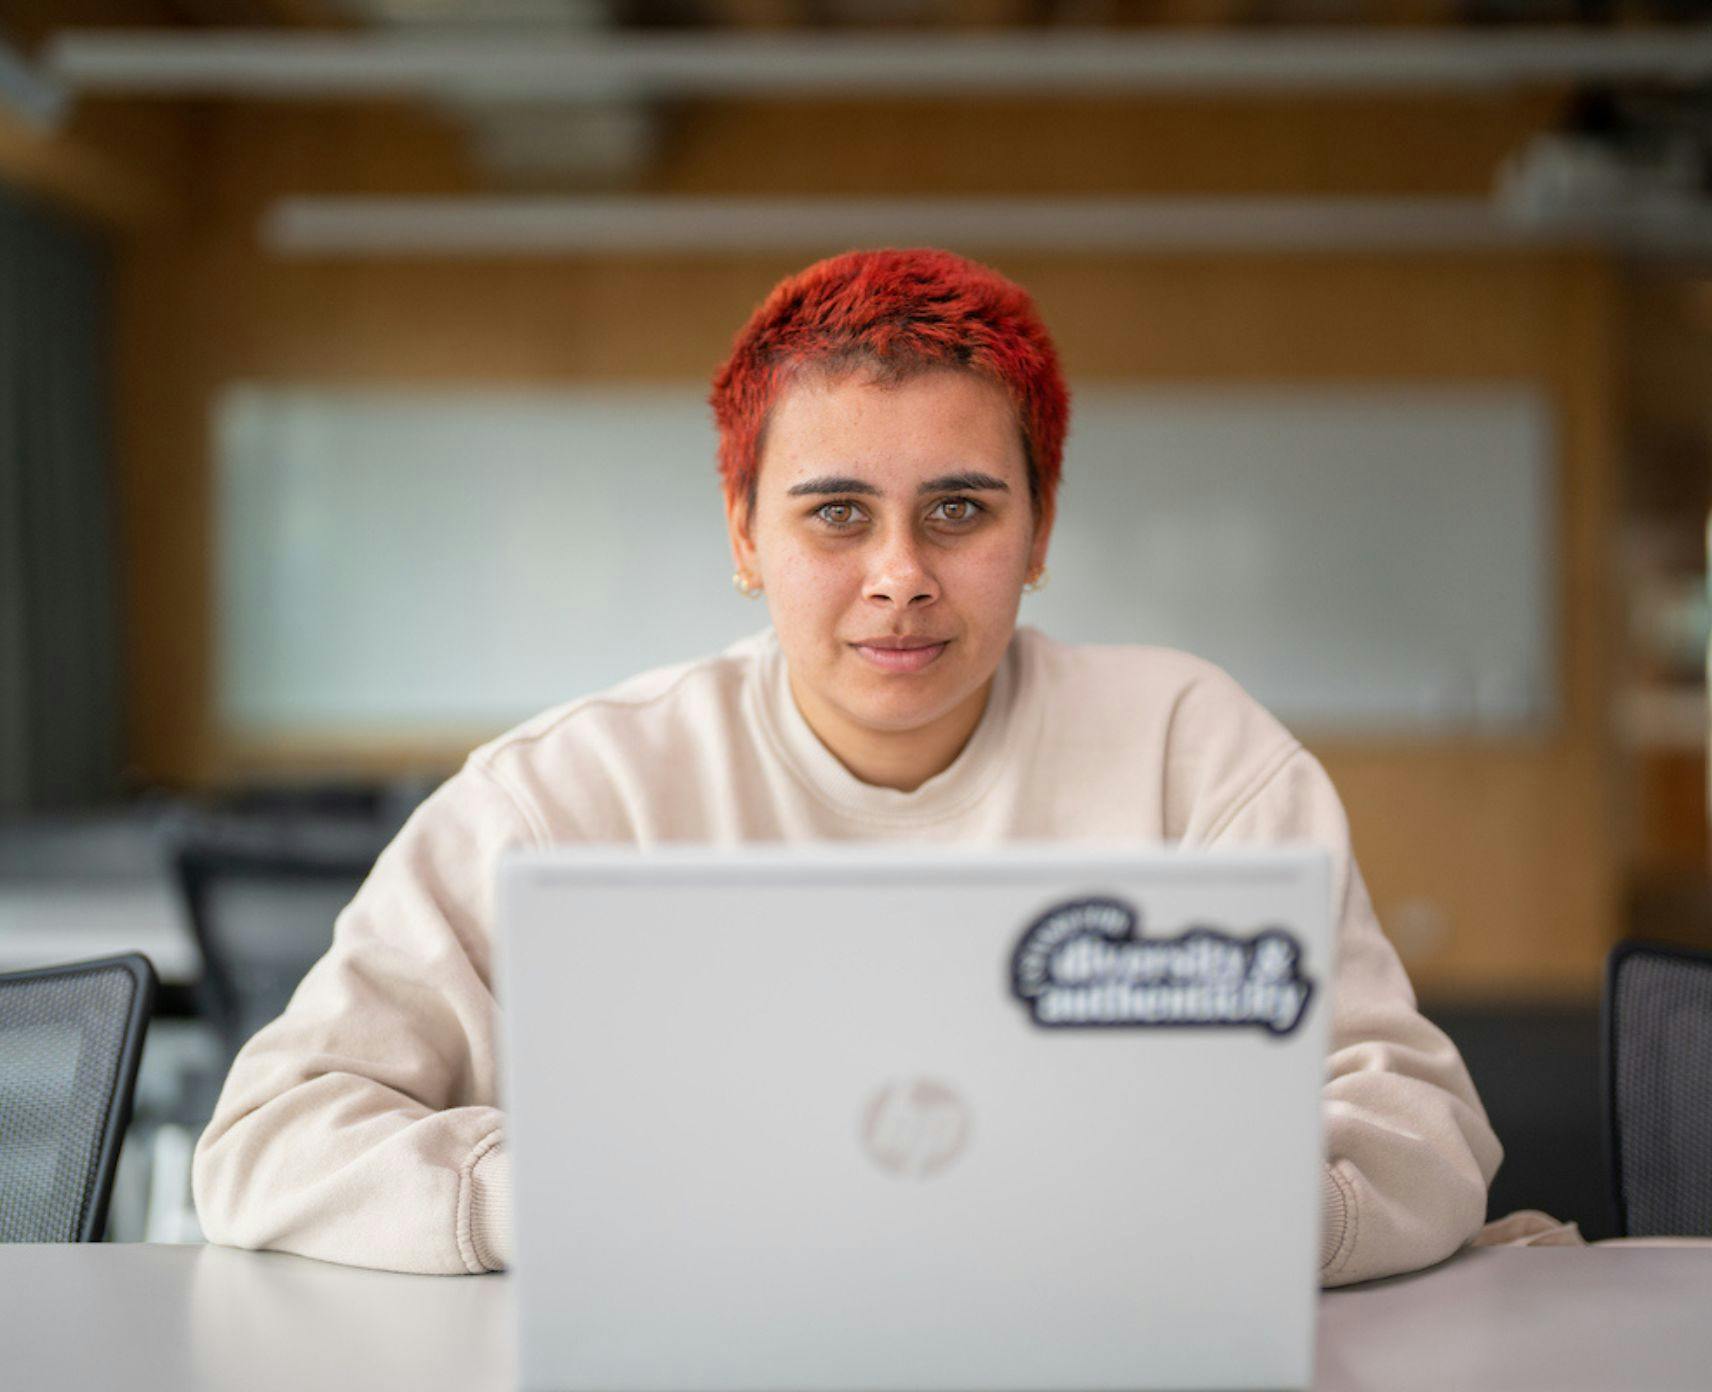 Faith Stevens sits in front of her laptop. She has cropped red hair and is wearing a beige jumper.